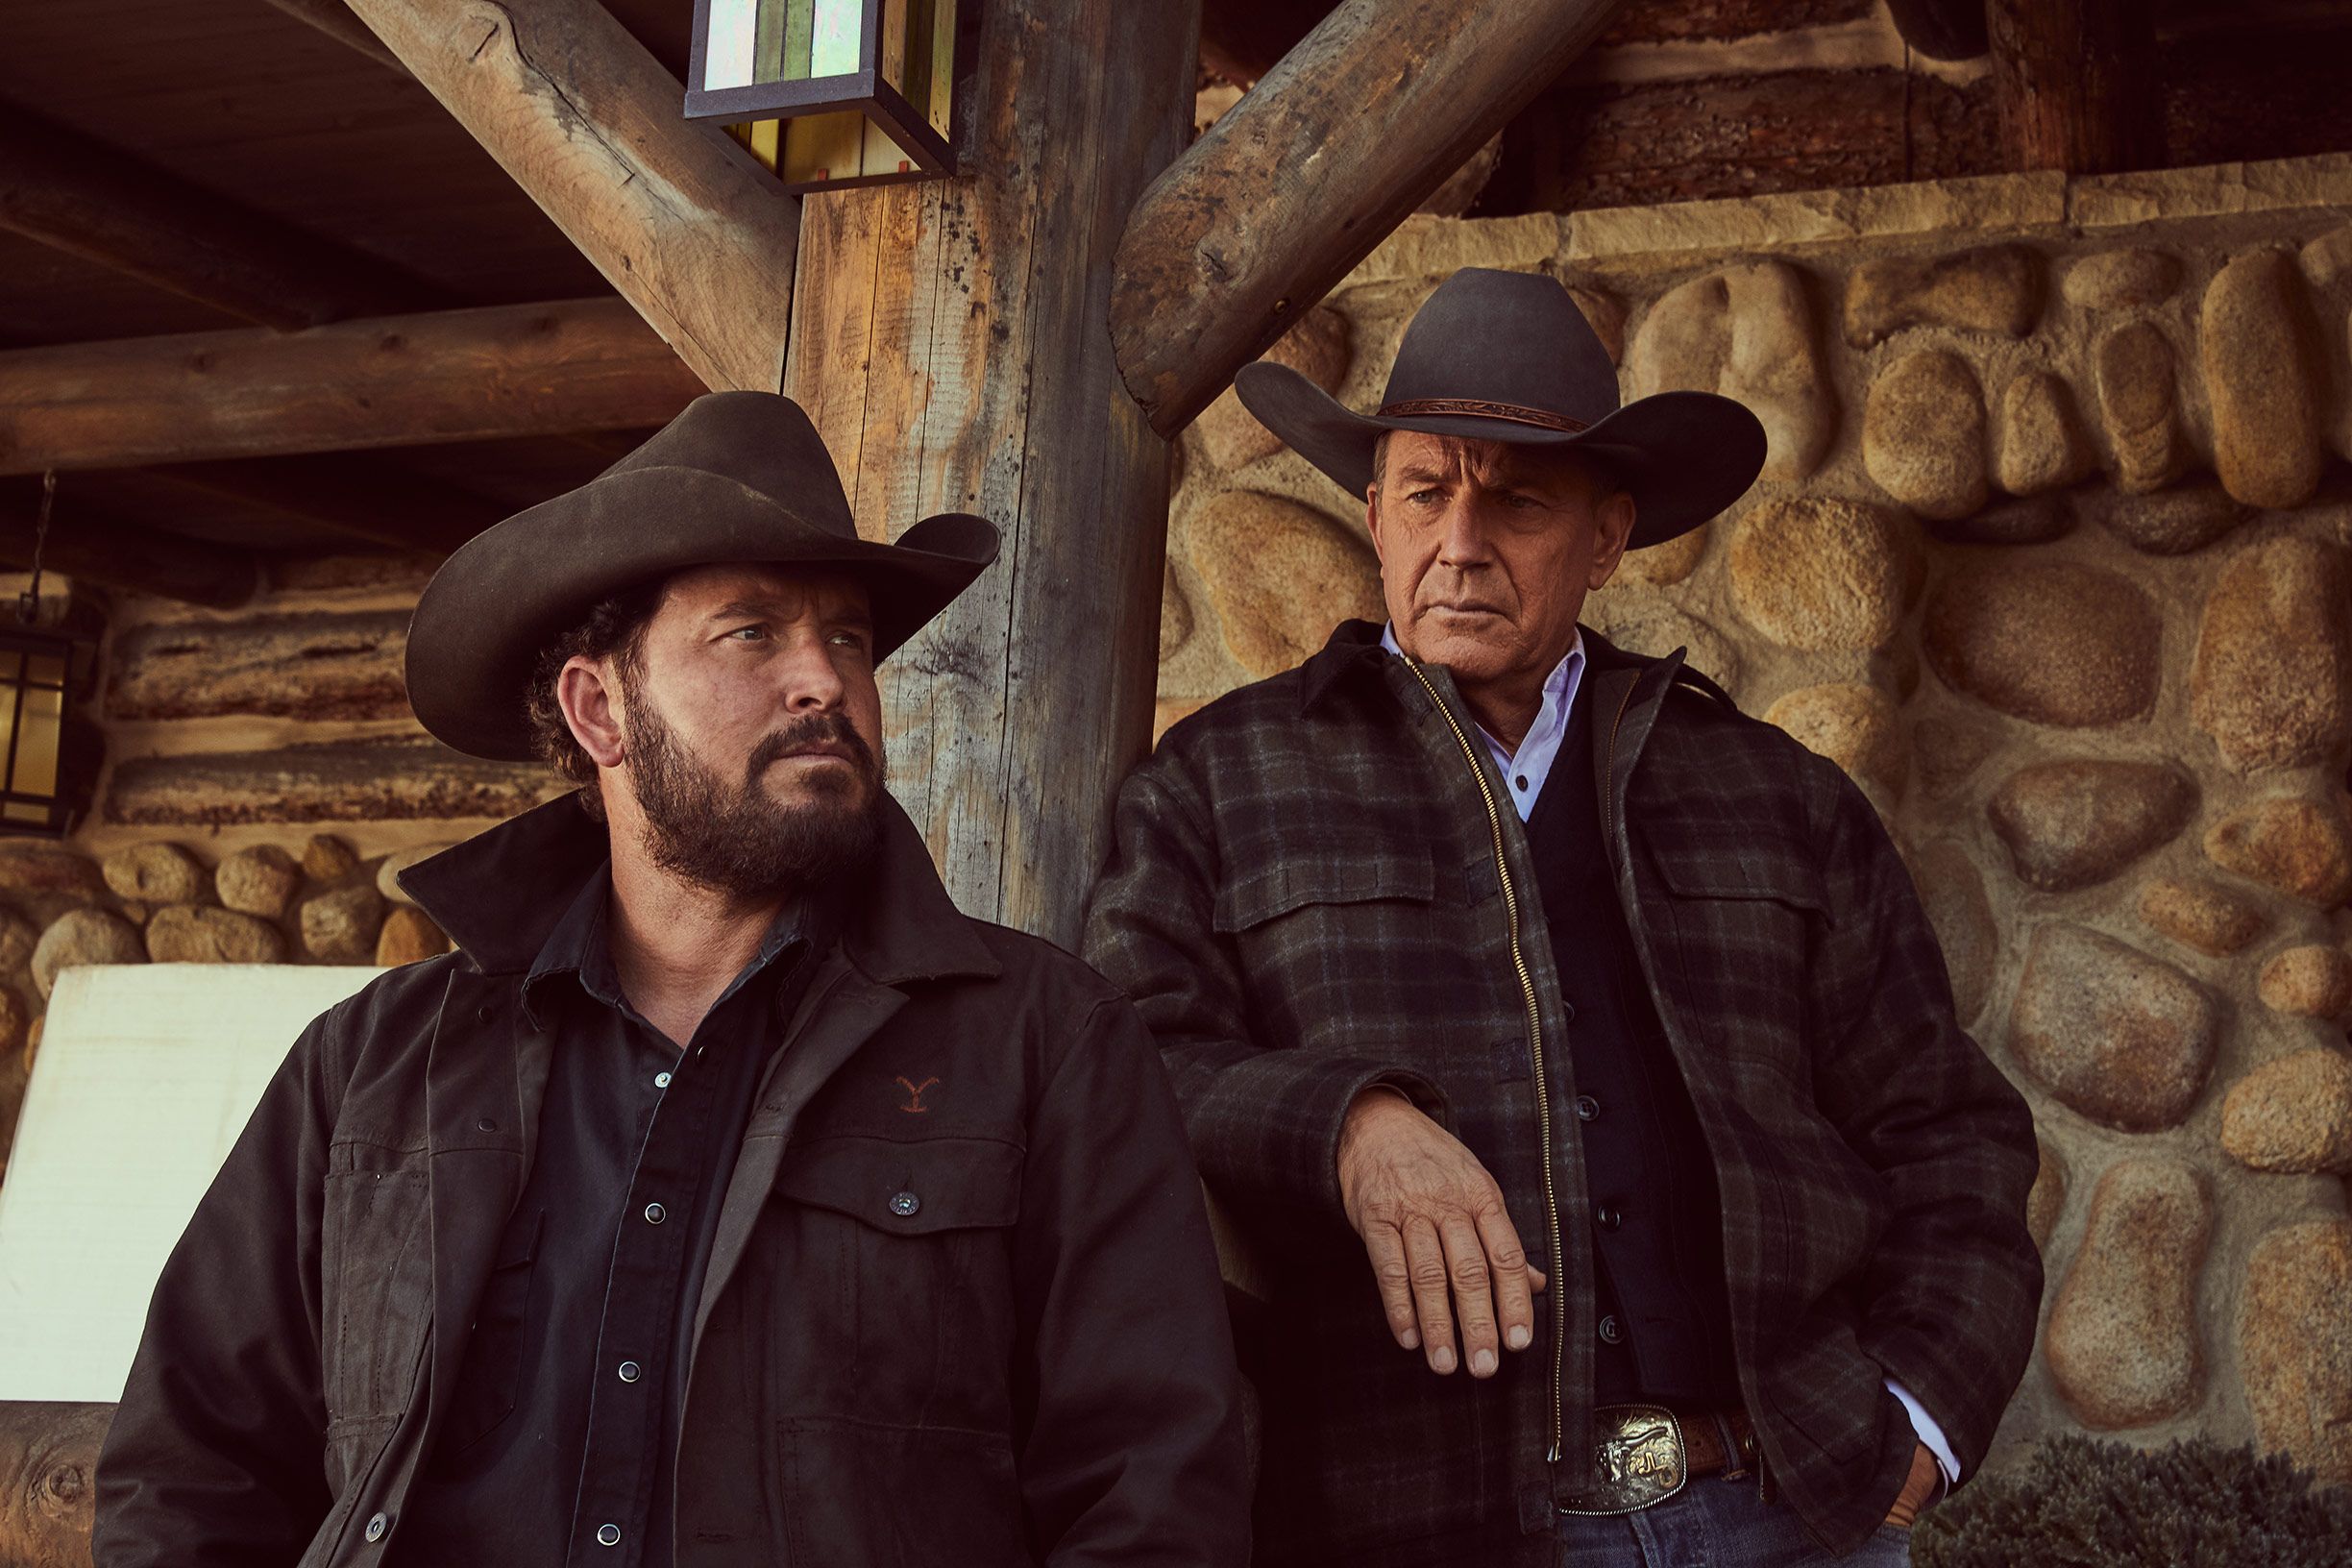 Best-bets for May 28: Catch up with “Yellowstone,” “Transplant”